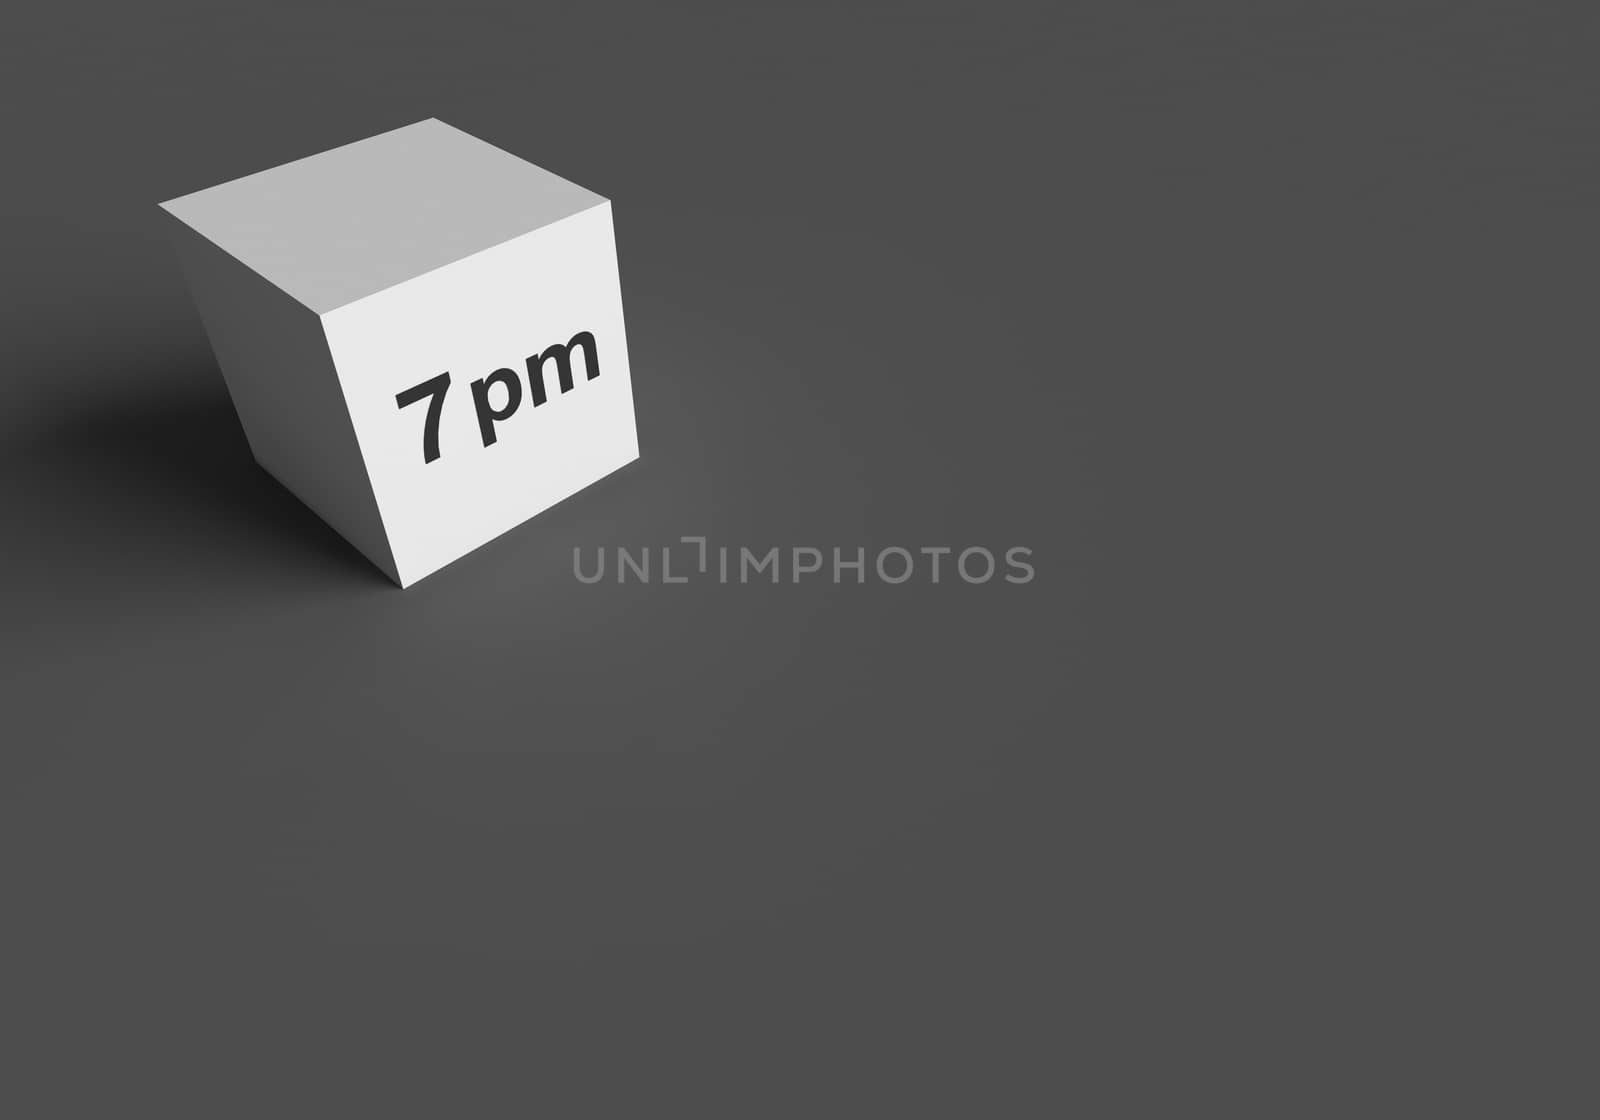 3D RENDERING WORDS 7 pm ON WHITE CUBE by PrettyTG